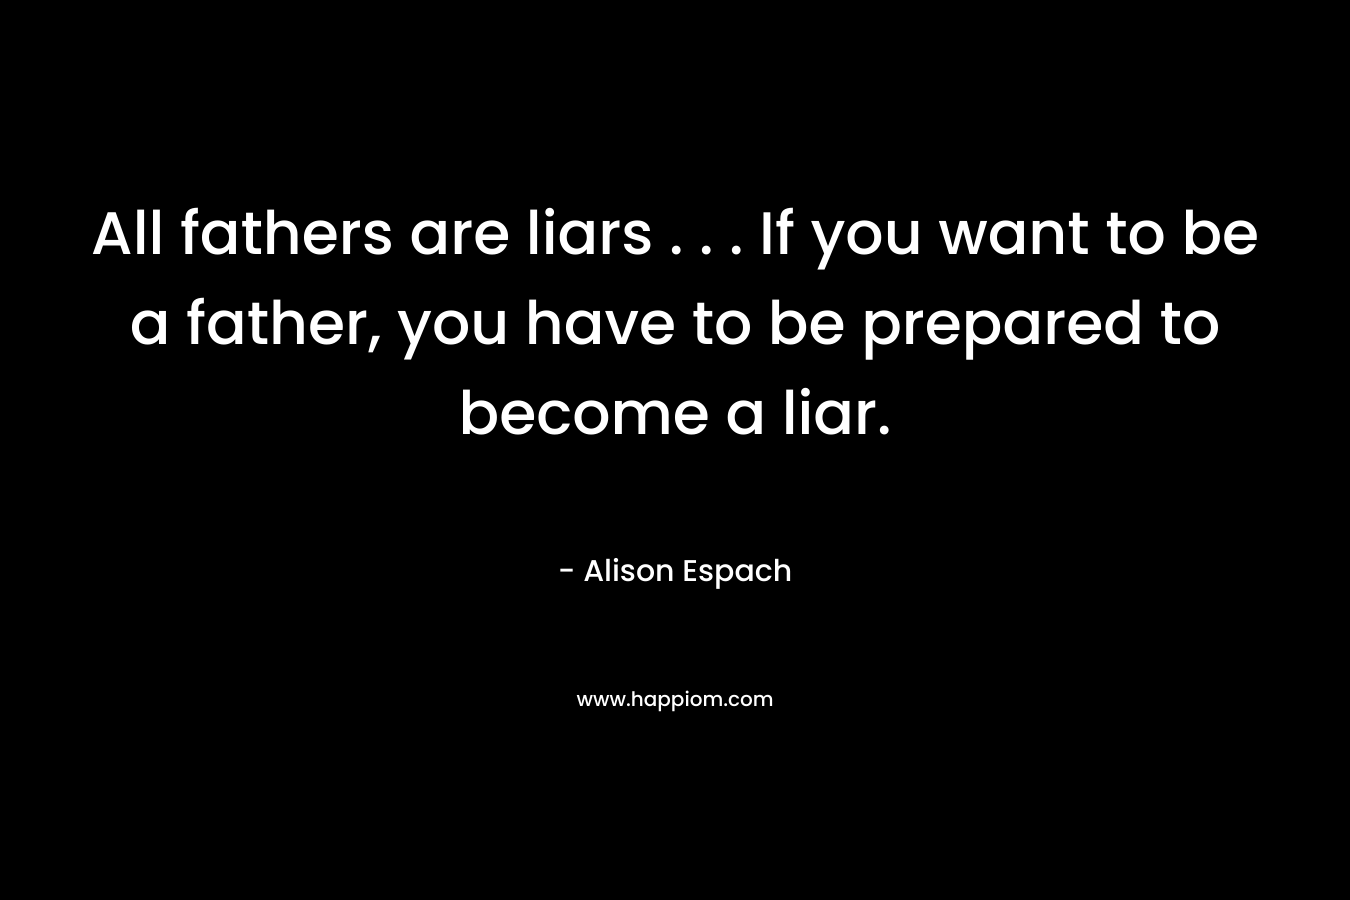 All fathers are liars . . . If you want to be a father, you have to be prepared to become a liar.